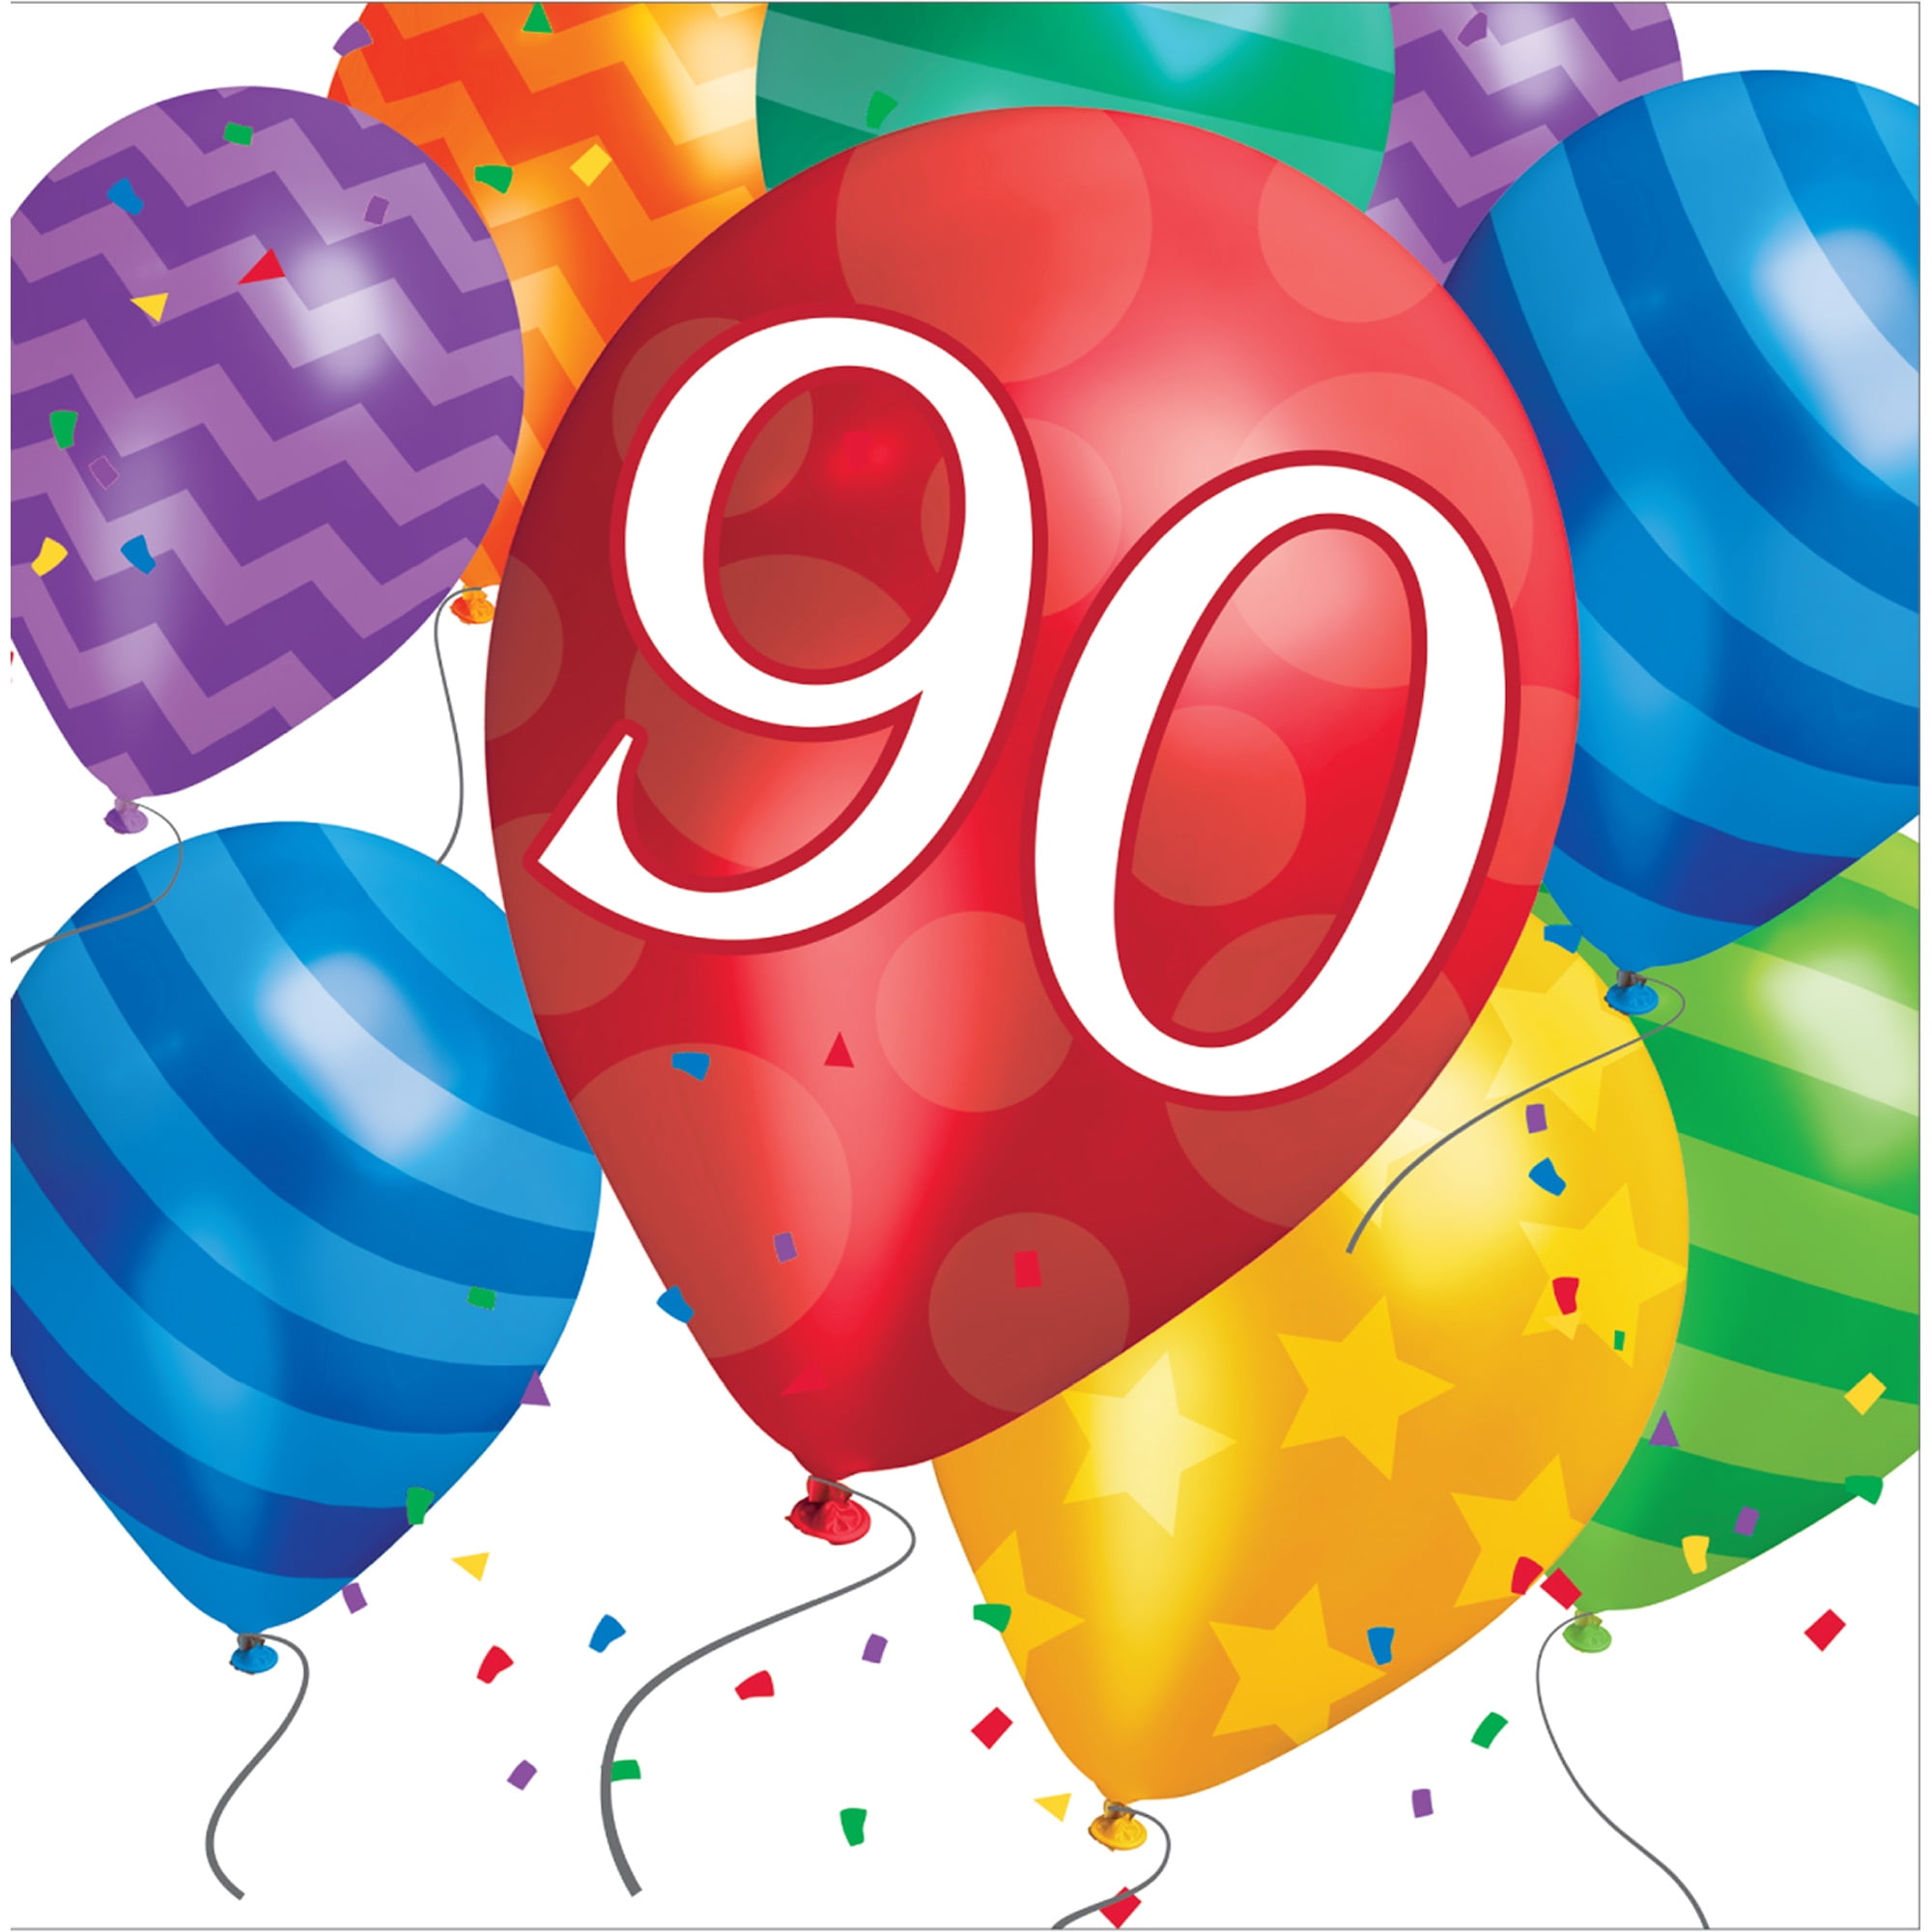 LINGTEER Happy 90th Birthday Table Honeycomb Centerpieces Perfect for Cheers to 90th Birthday Ninety Years Old Party Table Decorations Gift Sign.